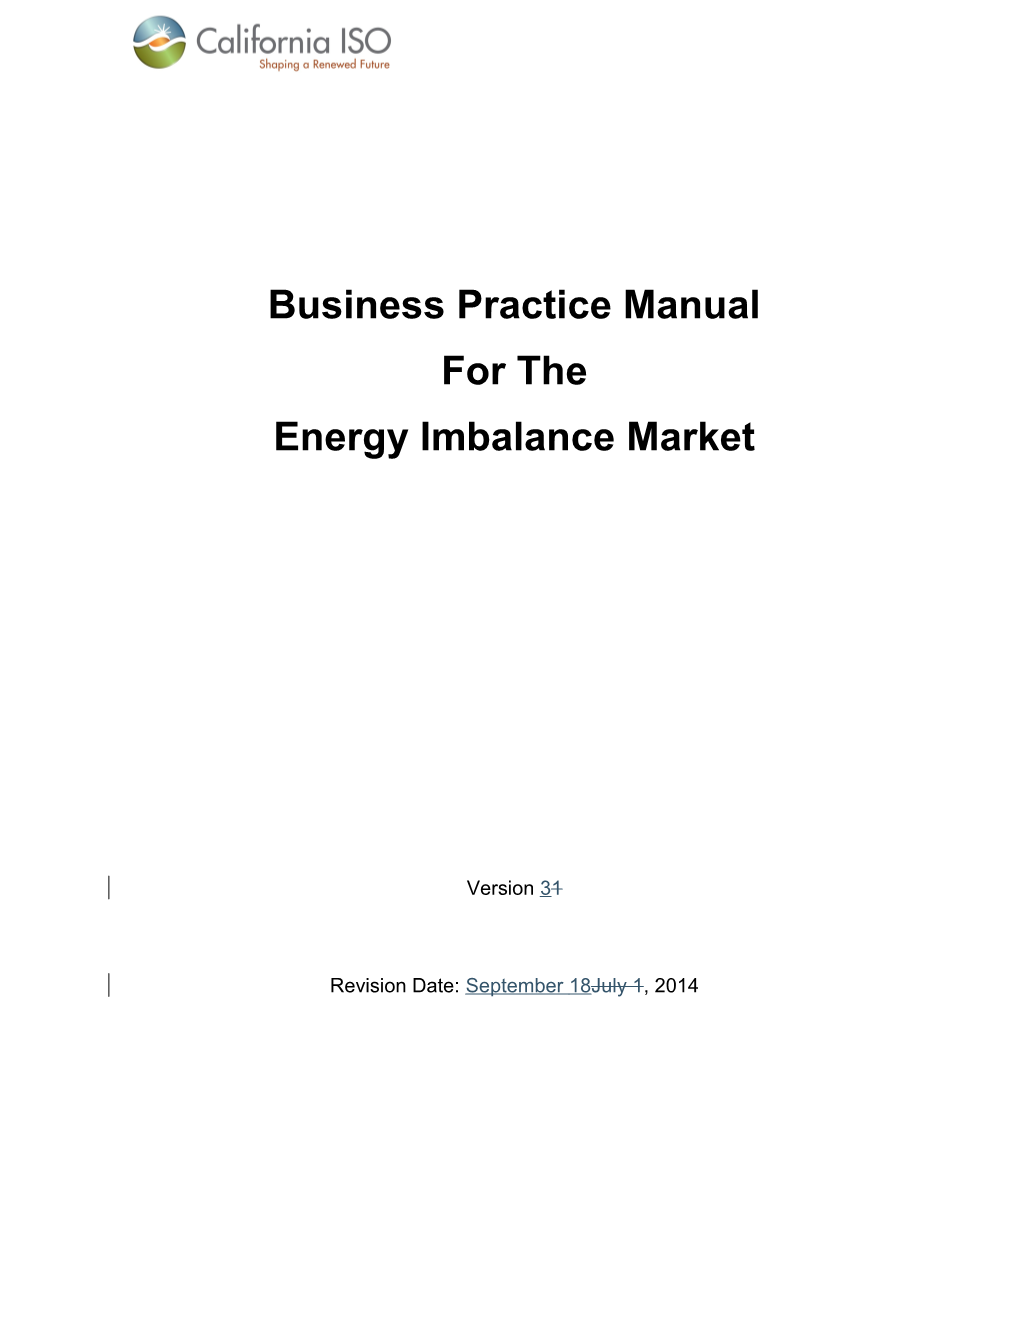 CAISO Business Practice Manual BPM for the Energy Imbalance Market